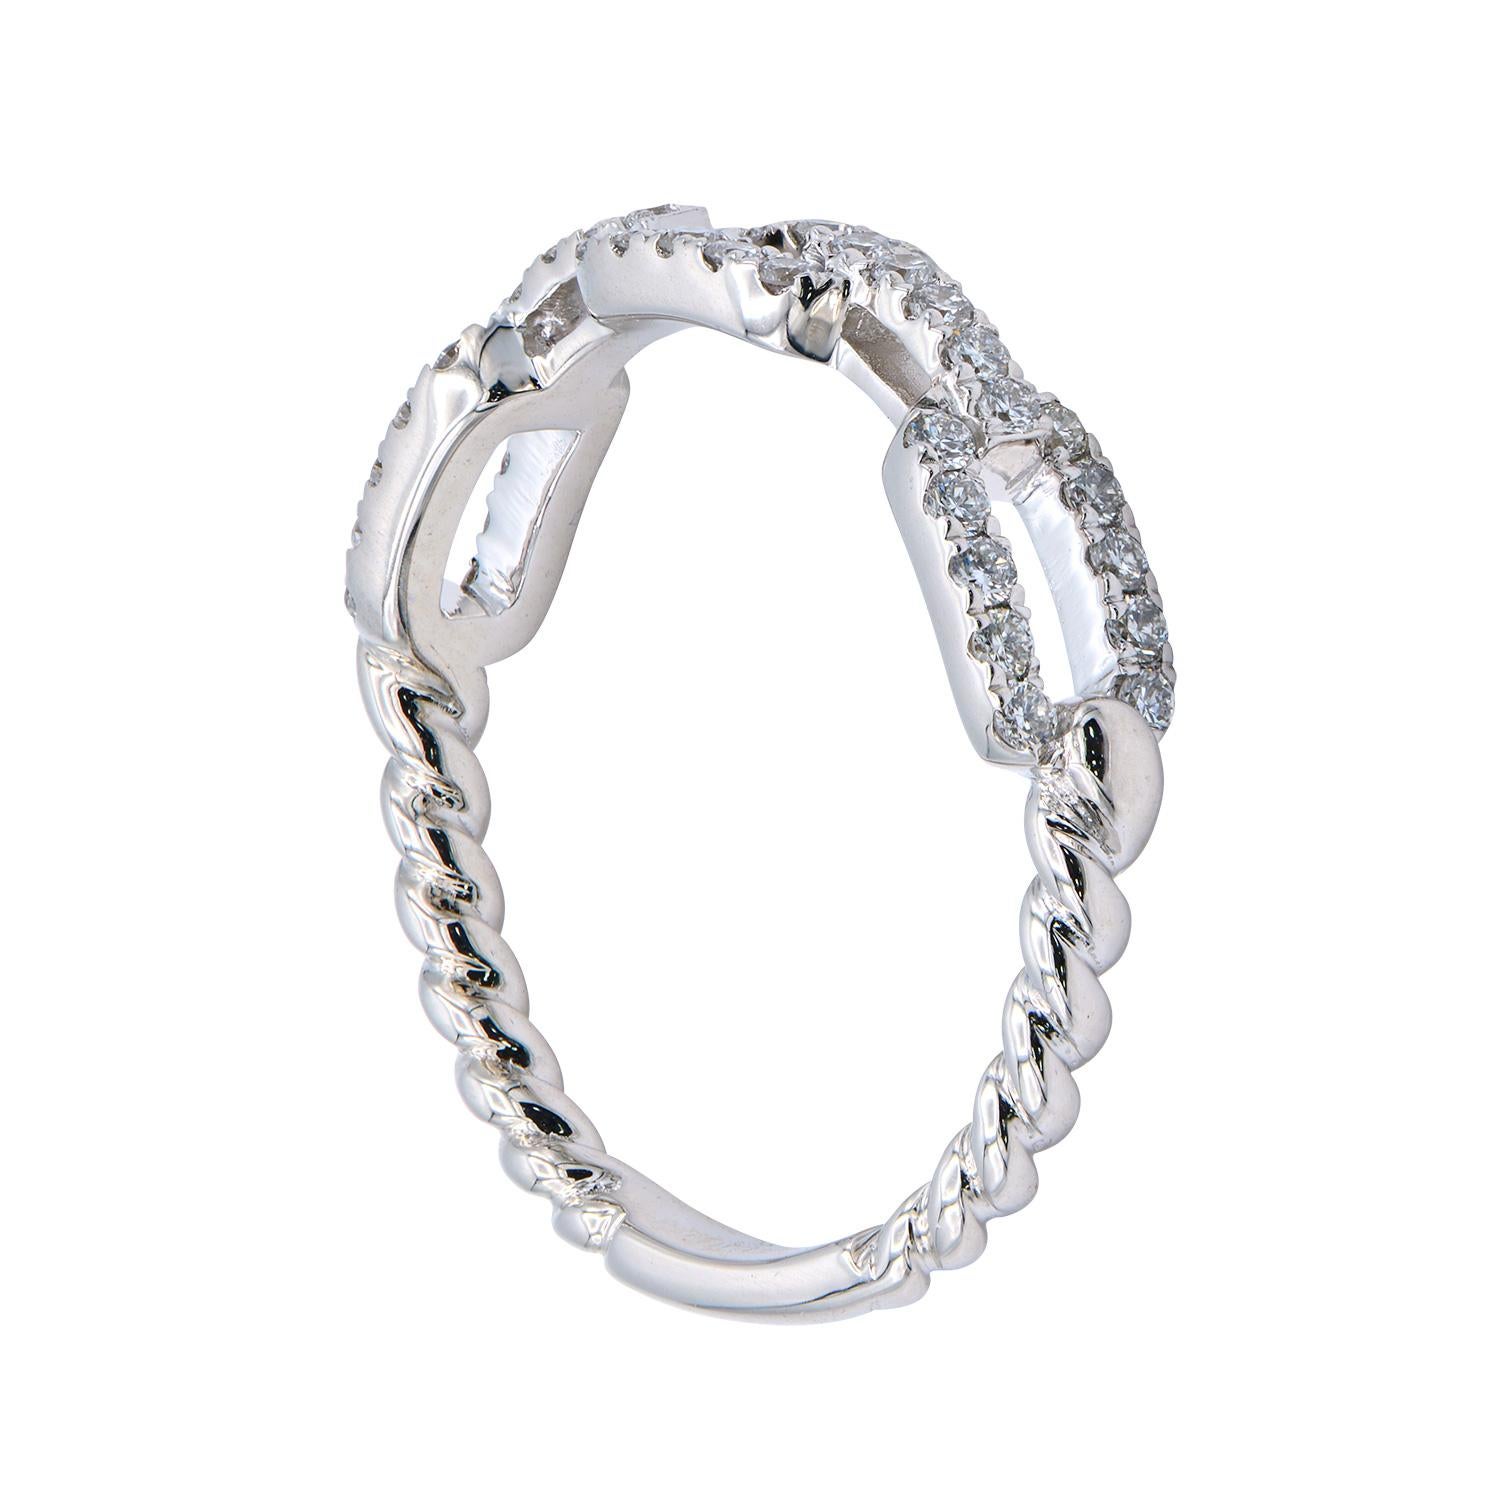 This modern fun ring is made from 2.5 grams of 18 karat white gold. The back of the ring looks like a twist and the front of the ring looks like necklace links put together and covered with 40 round VS2, G color diamonds totaling 0.31 carats. This